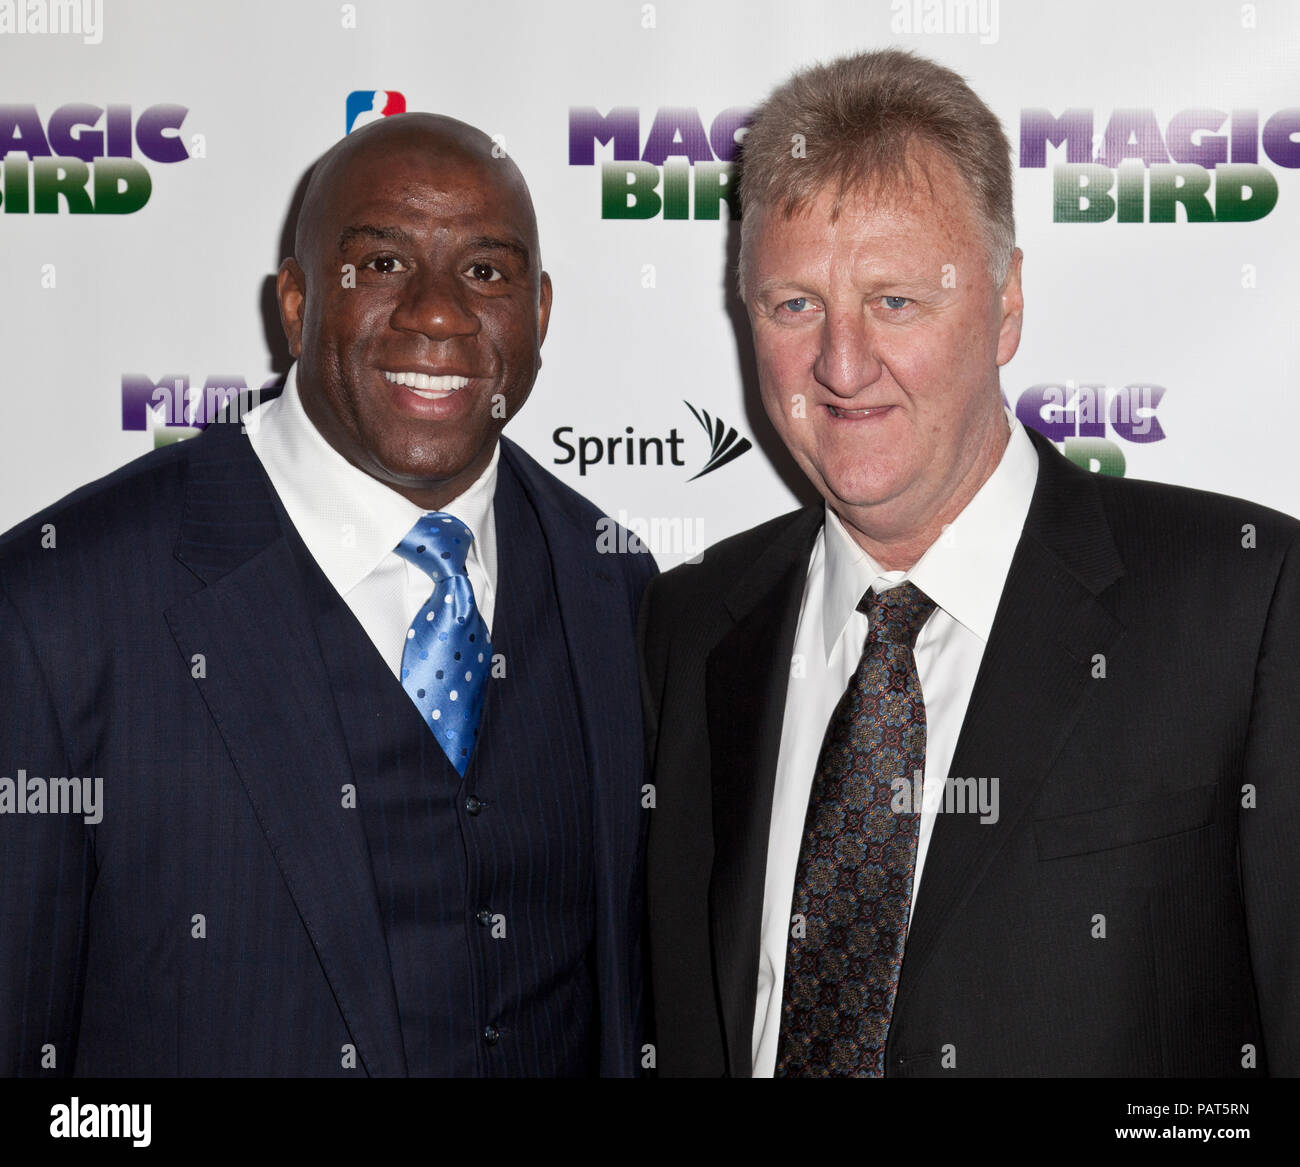 Video: Larry Bird and Magic Johnson on the Late Show with David Letterman